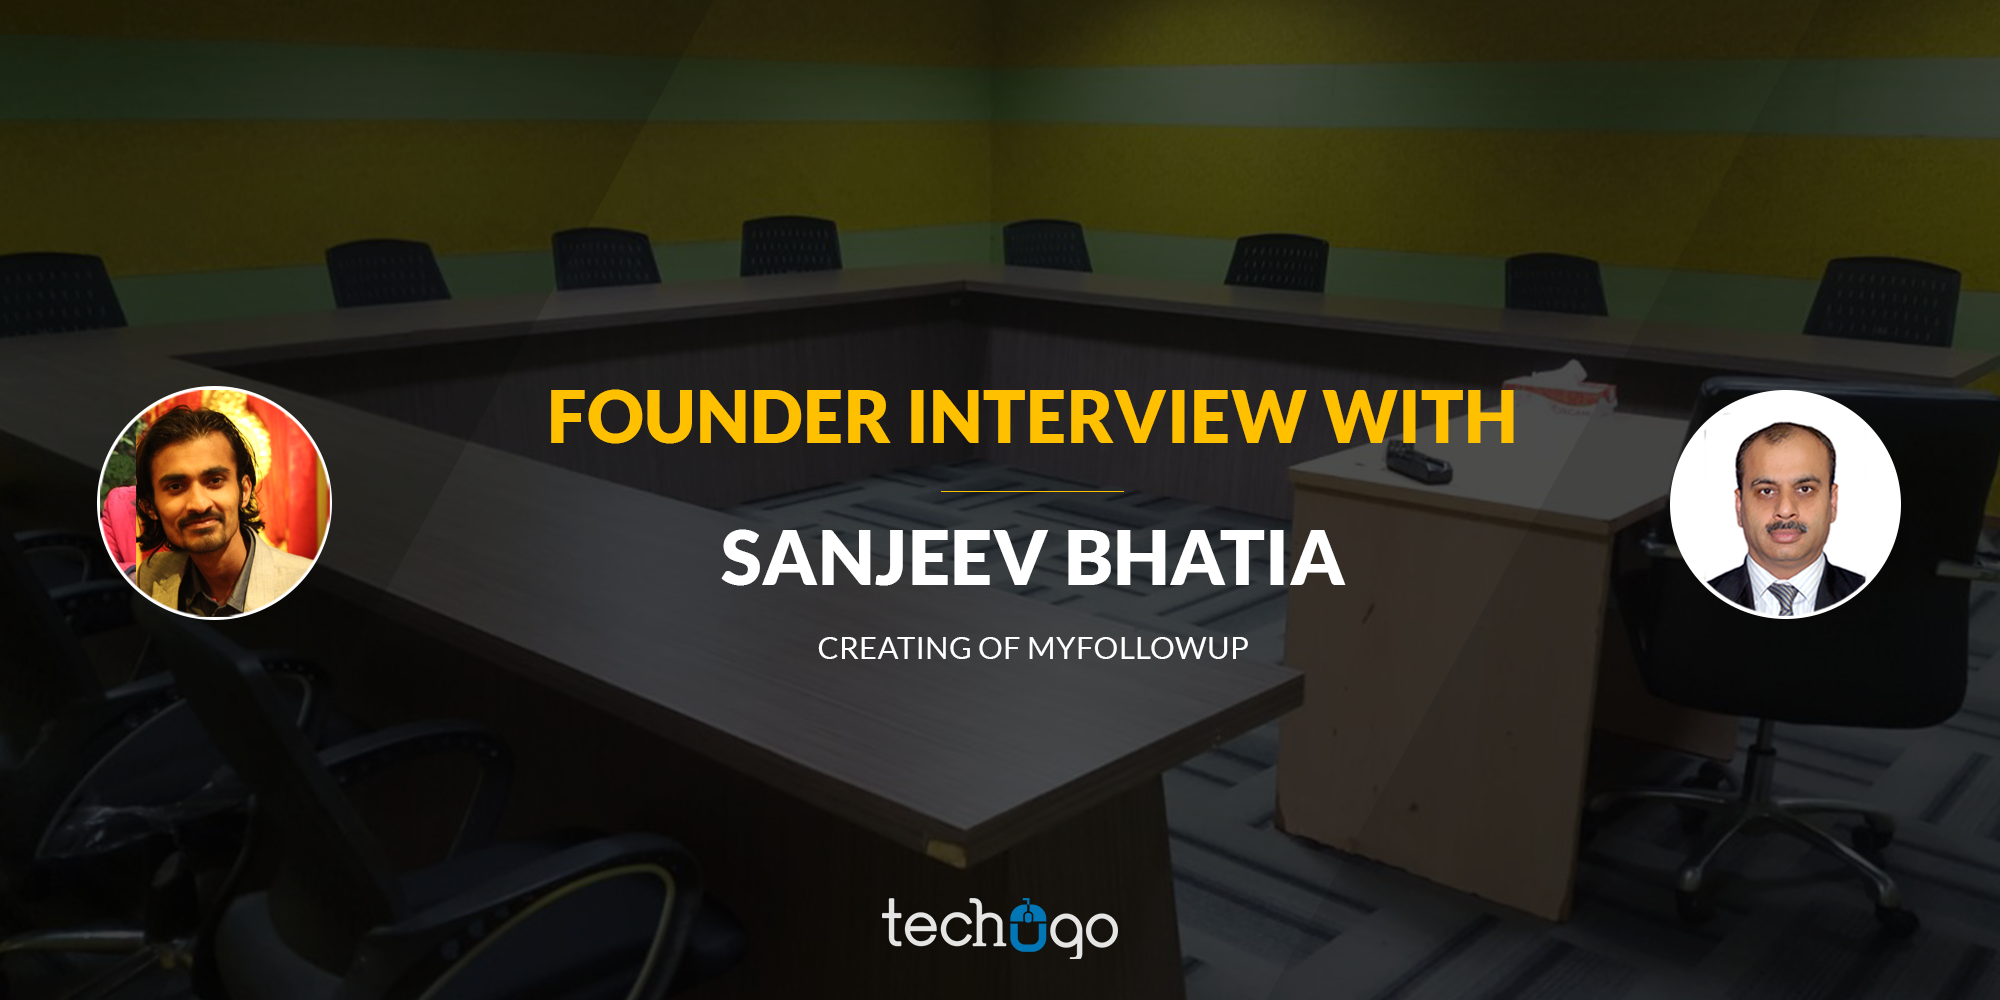 Founder Interview With Sanjeev Bhatia Creating Of Myfollowup